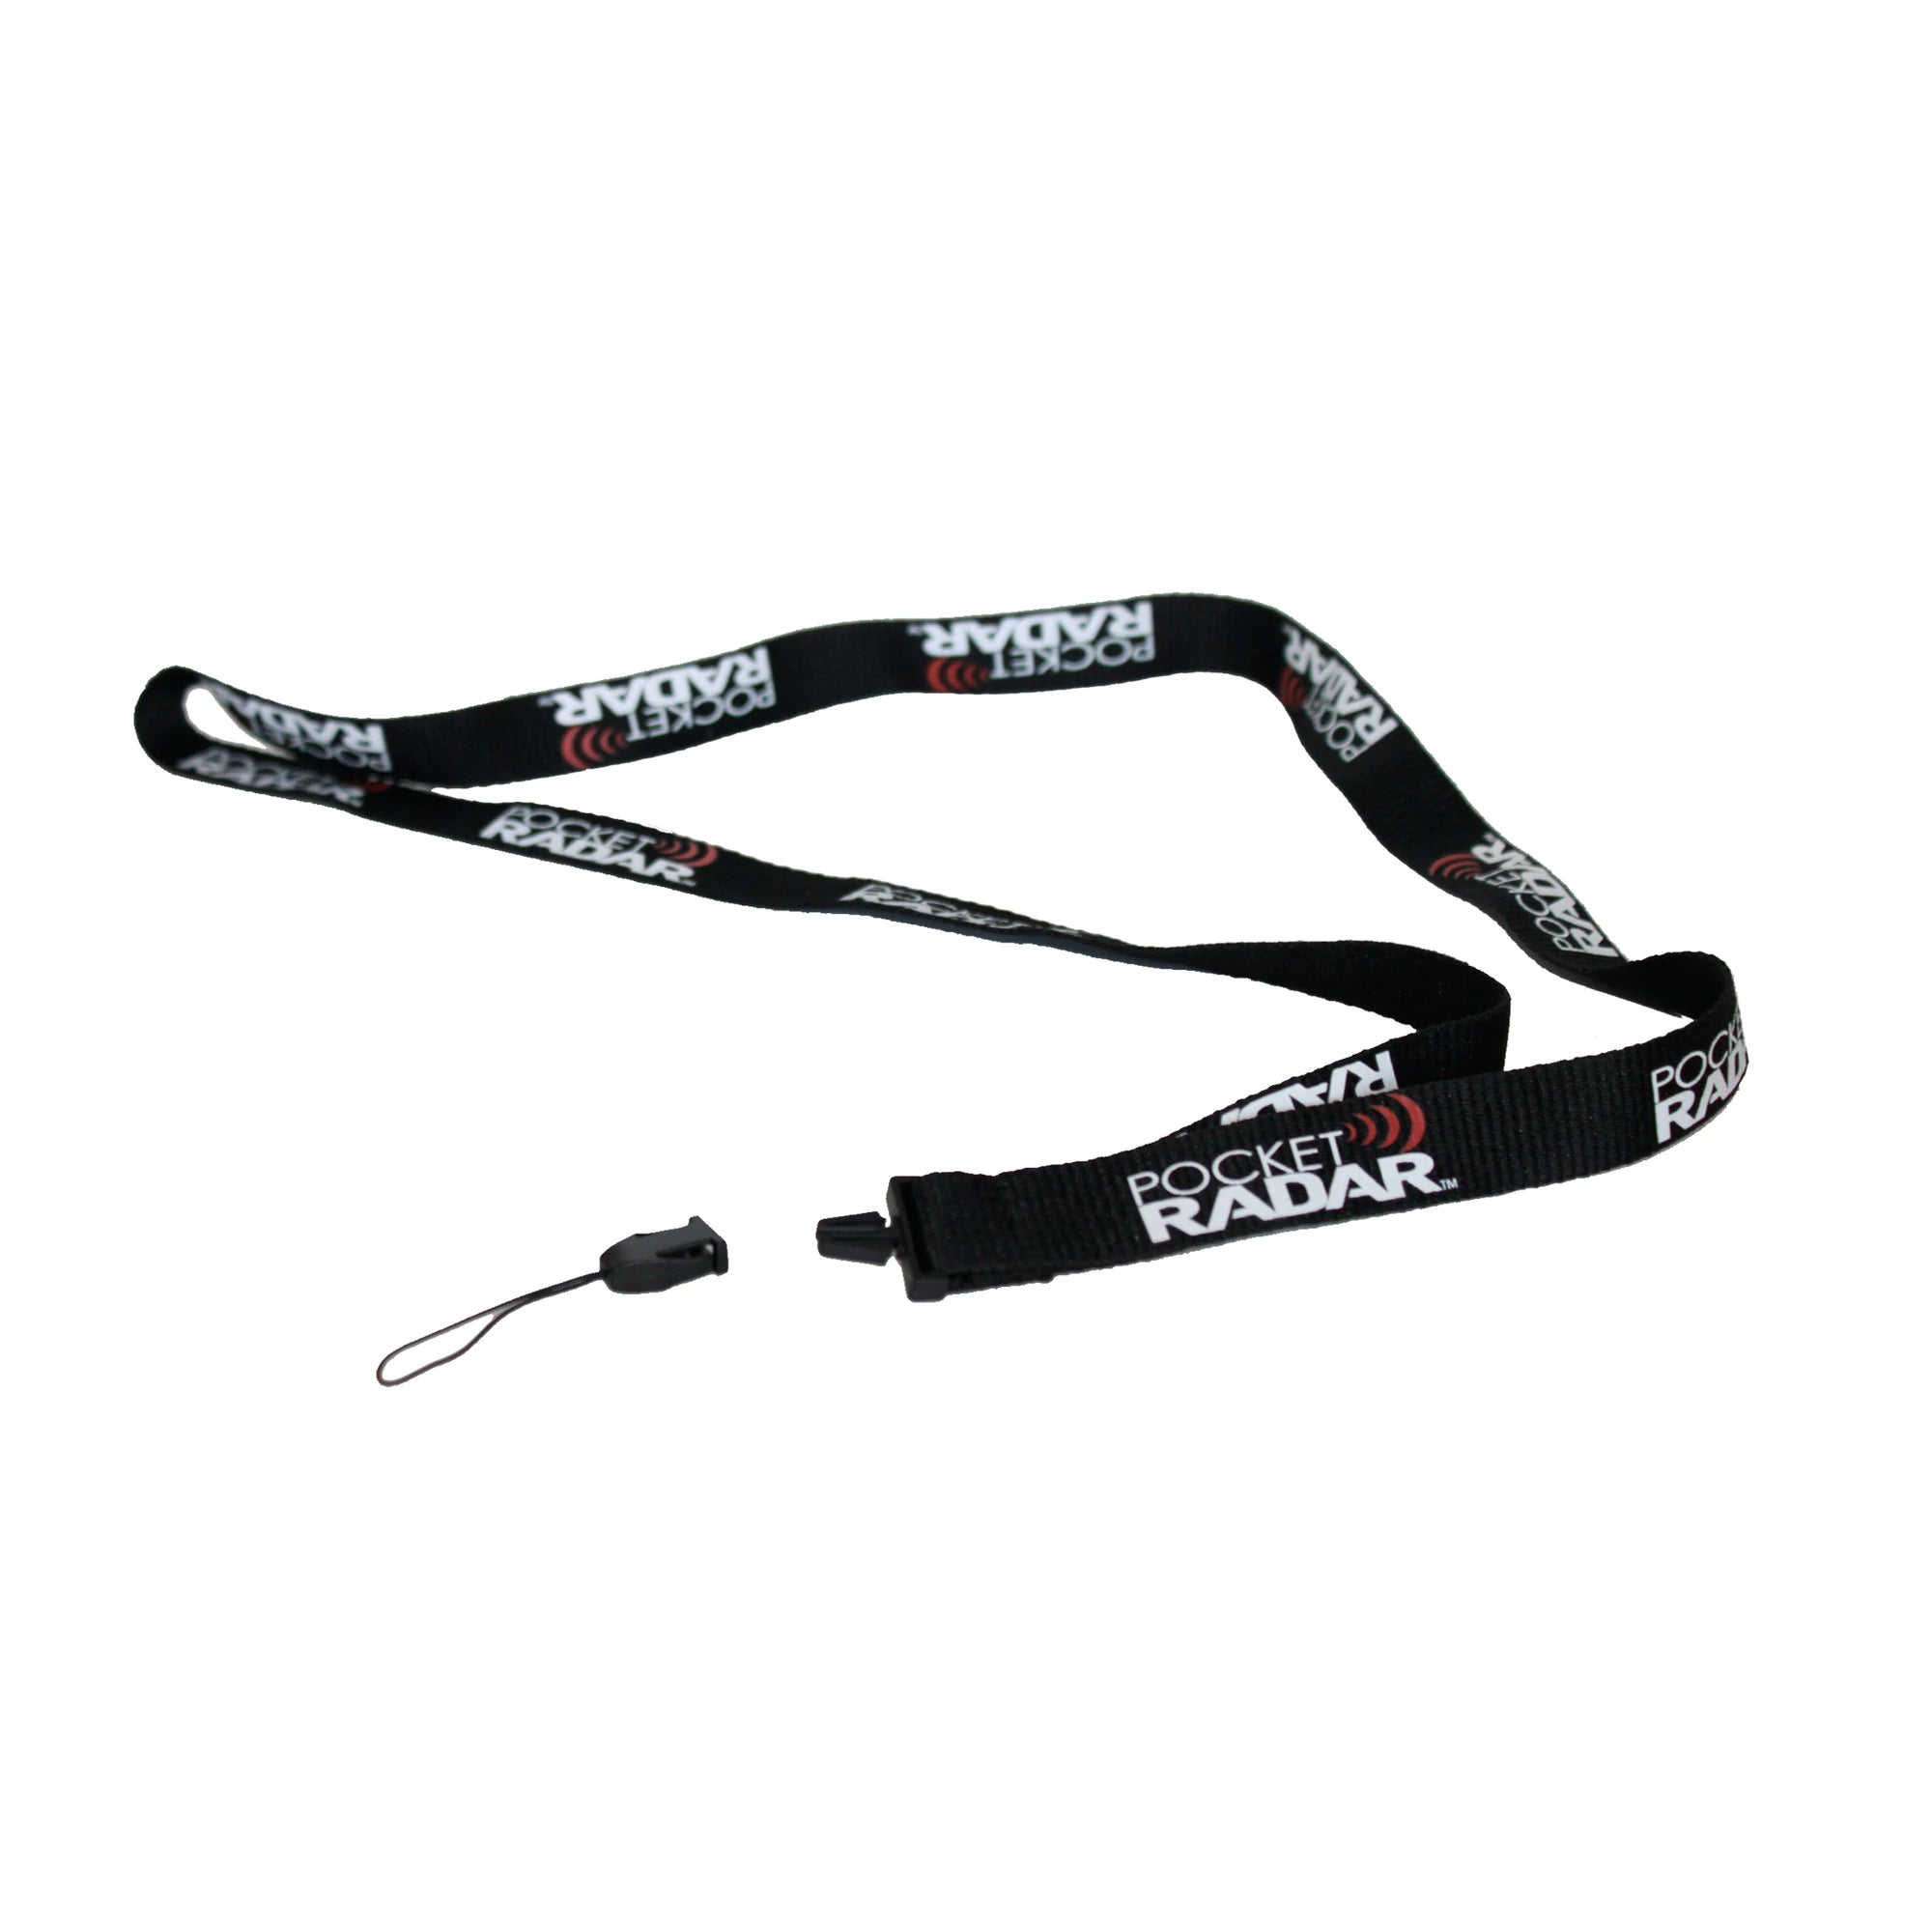 Lanyard for all Pocket Sized Radars With Connector Detached